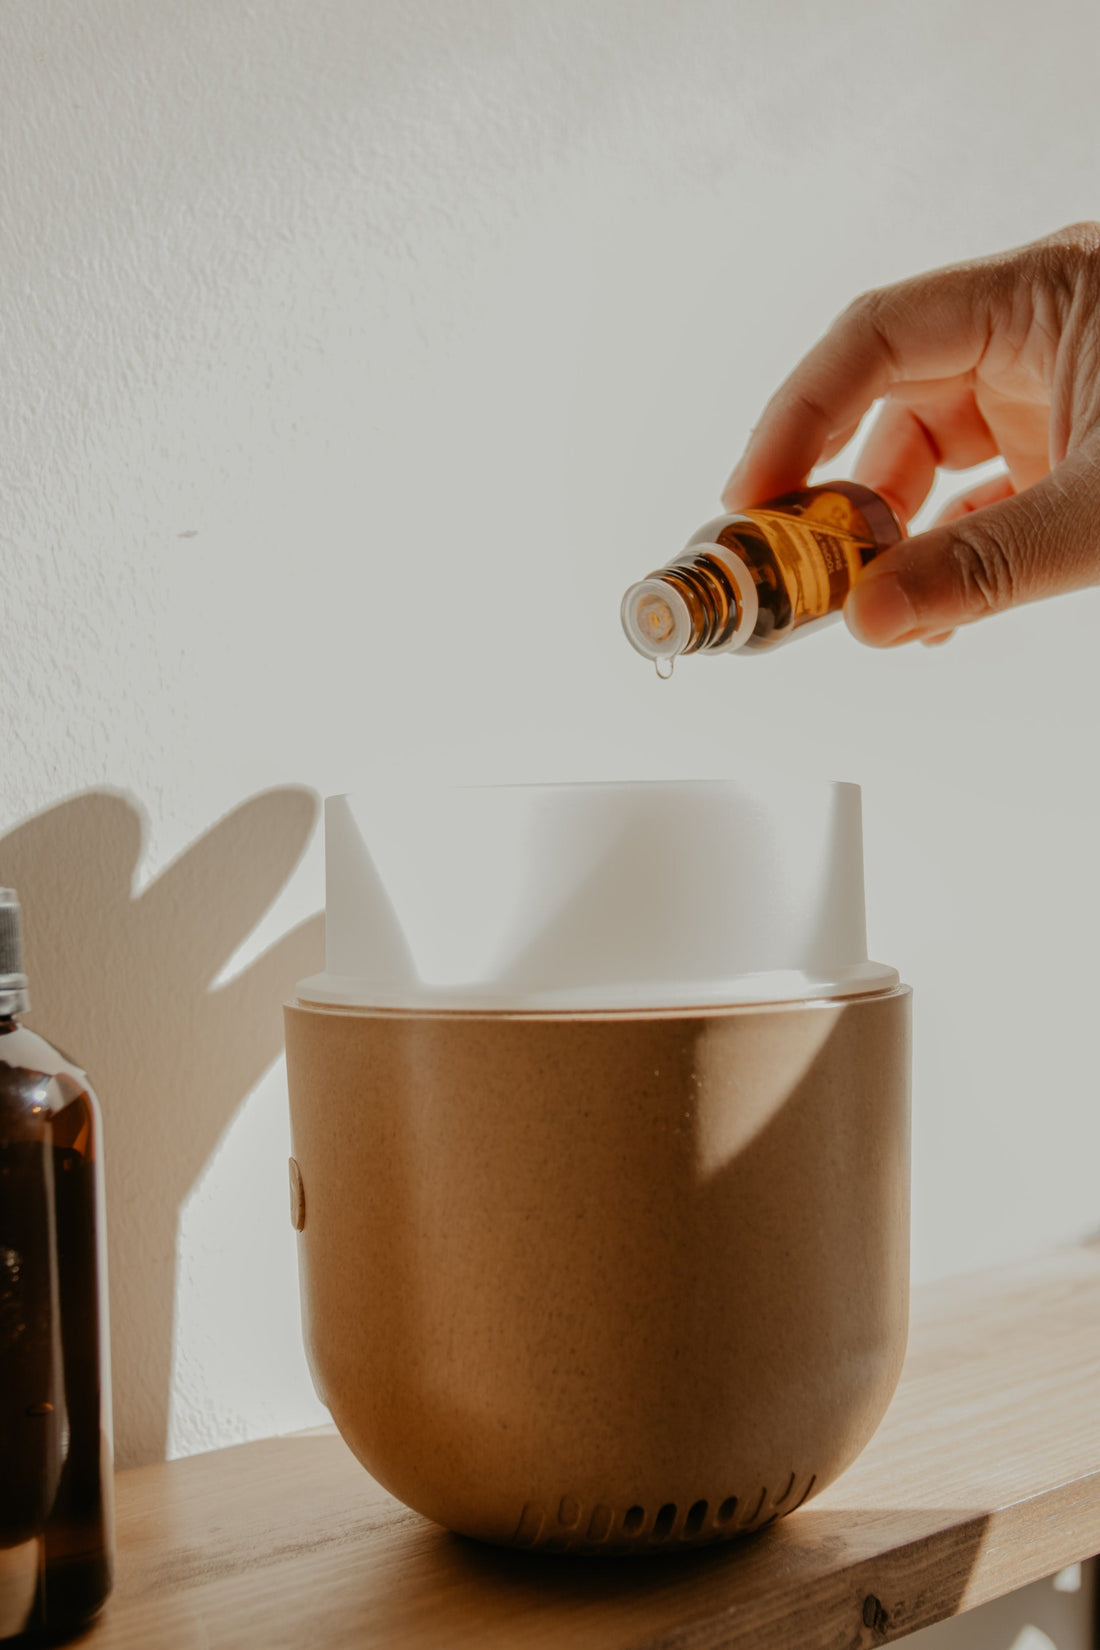 How to Use Essential Oils and Fragrance Oils in Creative, Healthy Ways - Aroma Energy